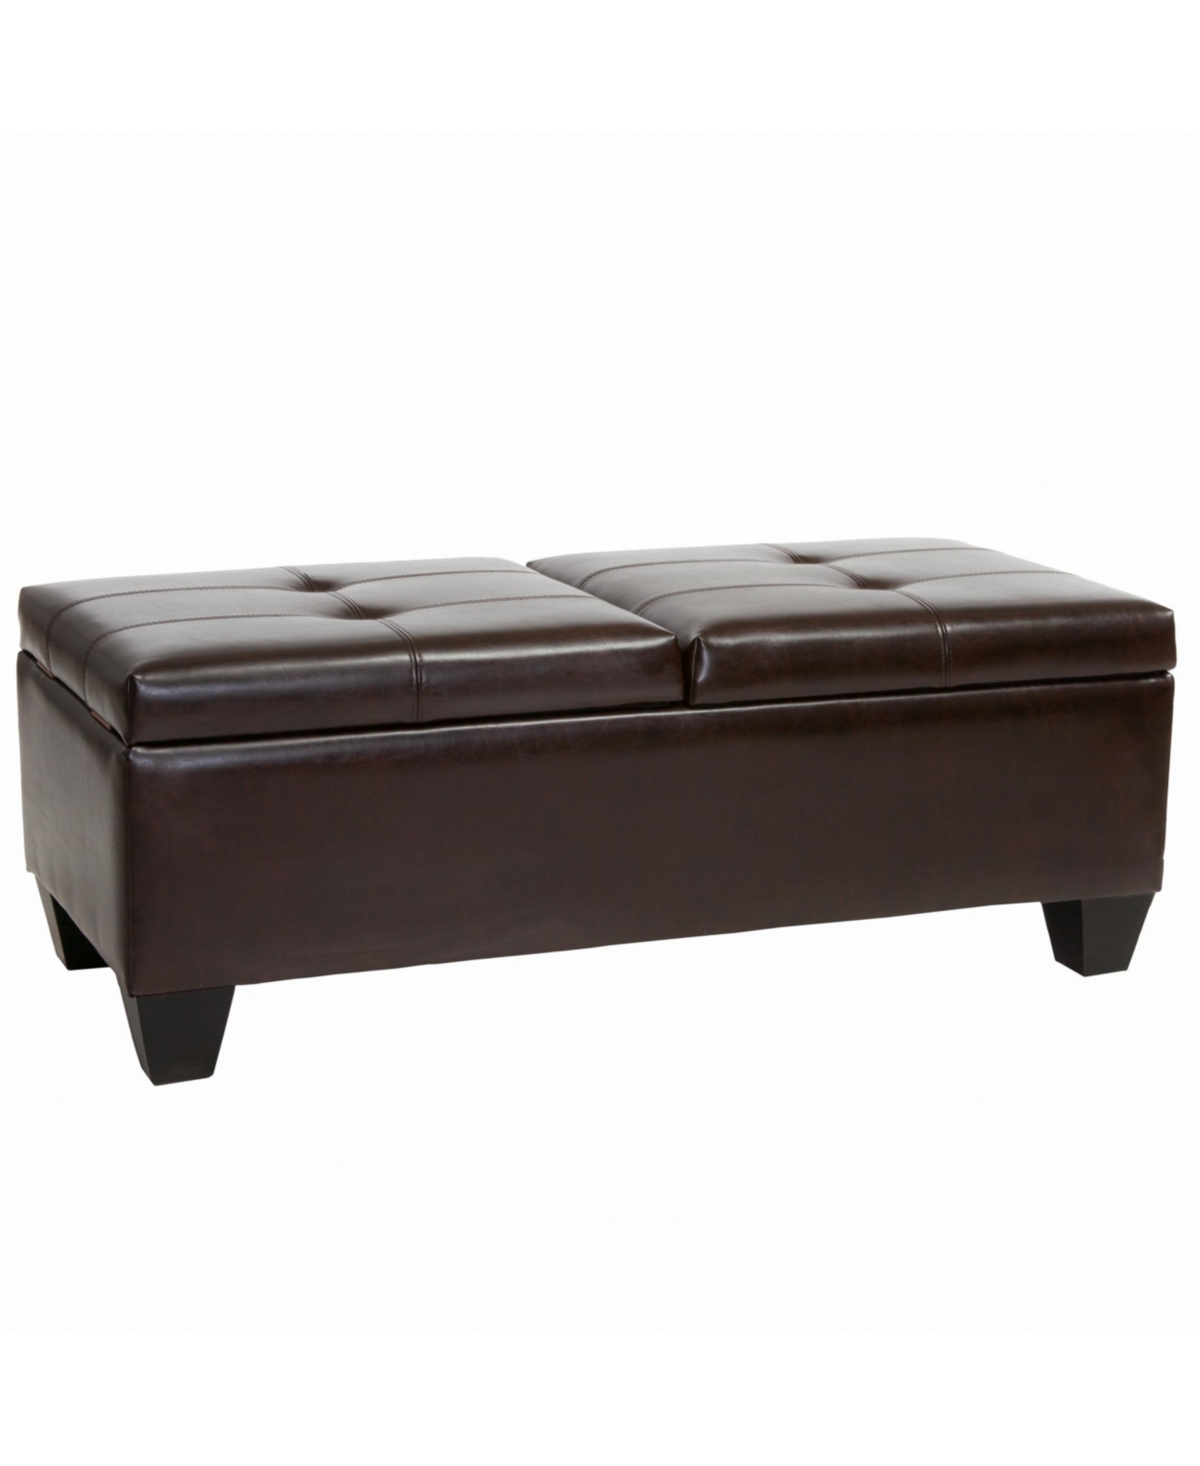 Noble House Merrill Double Opening Storage Ottoman In Chocolate Brown